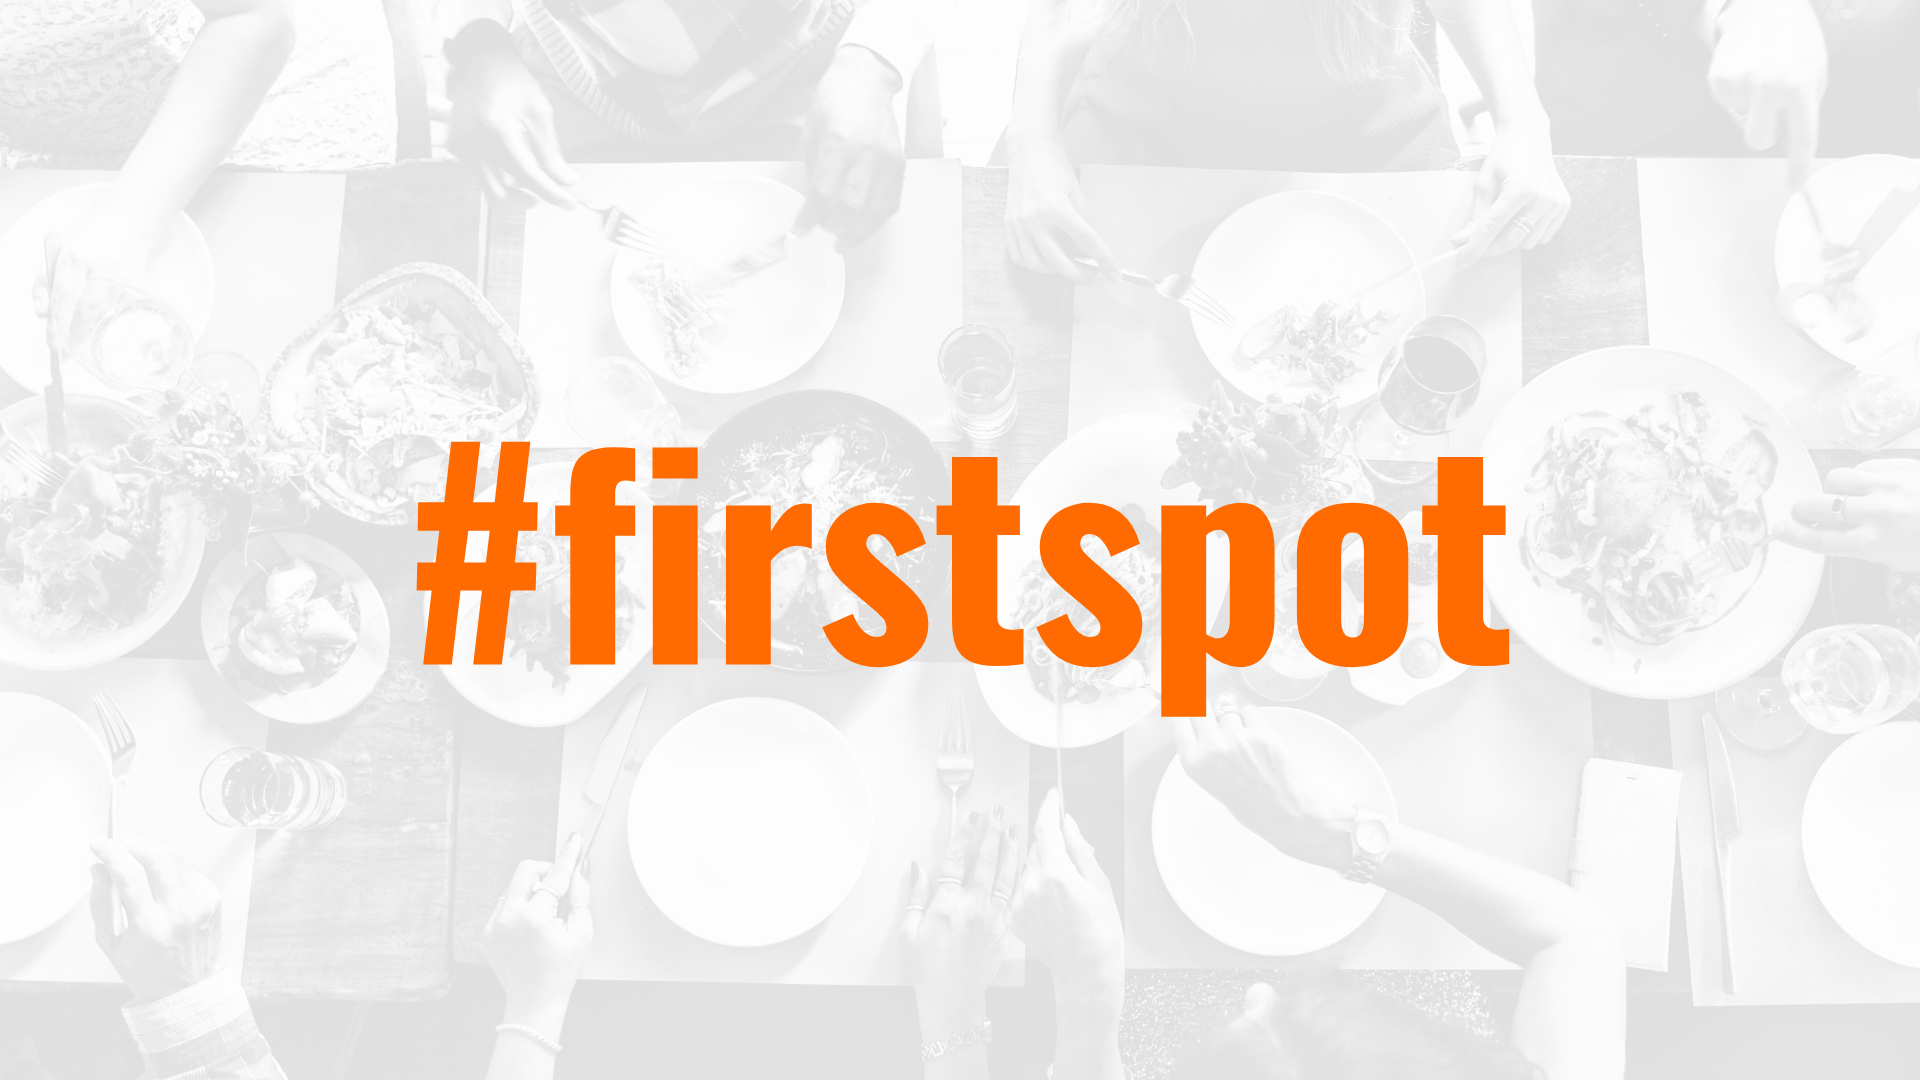 The #firstspot Instagram Story Challenge